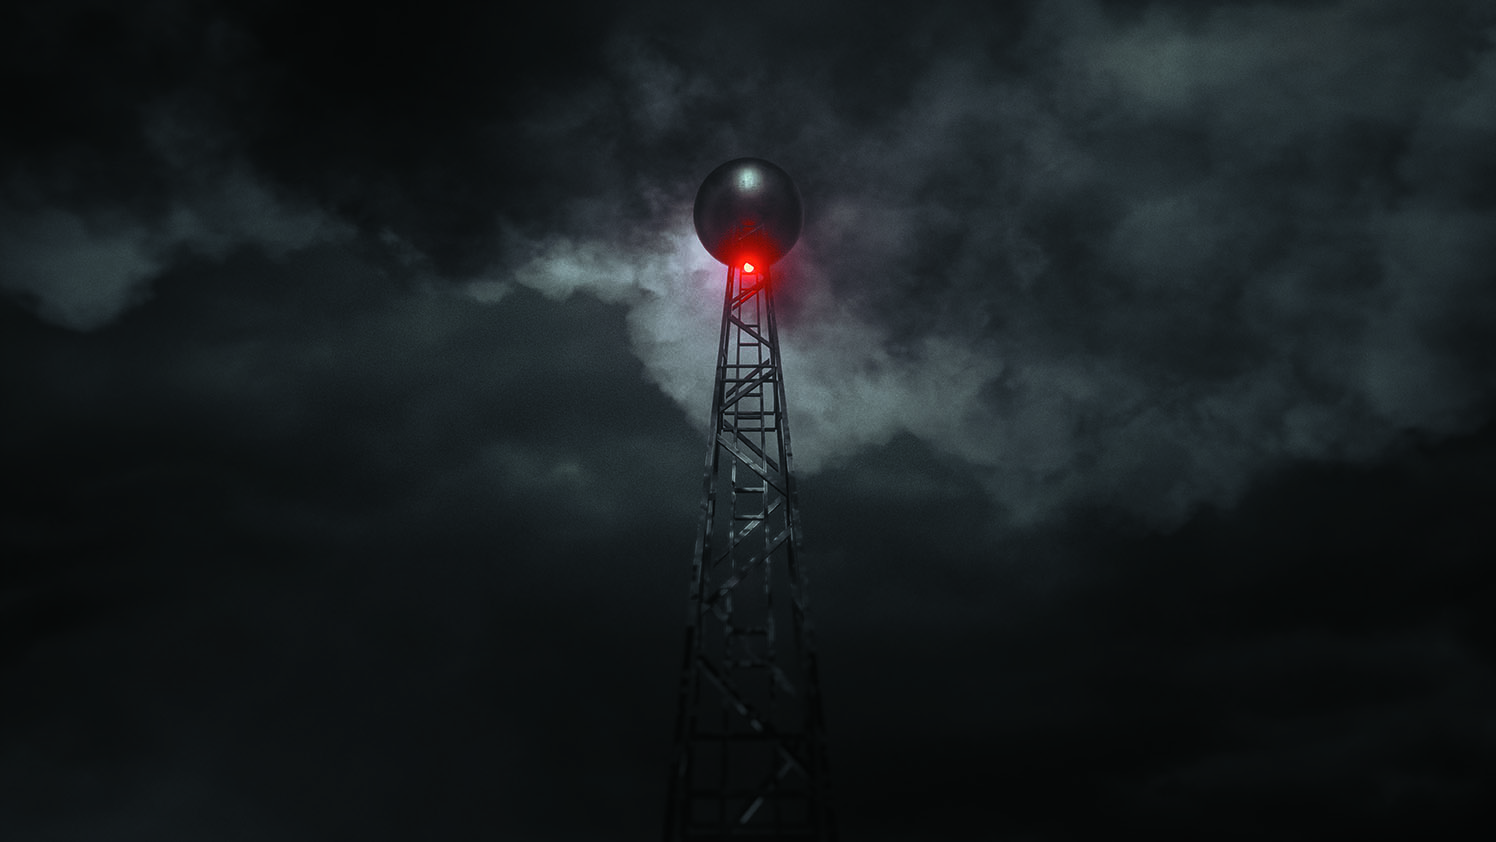 A radio mast is surrounded by darkness and clouds. A single red light glows.